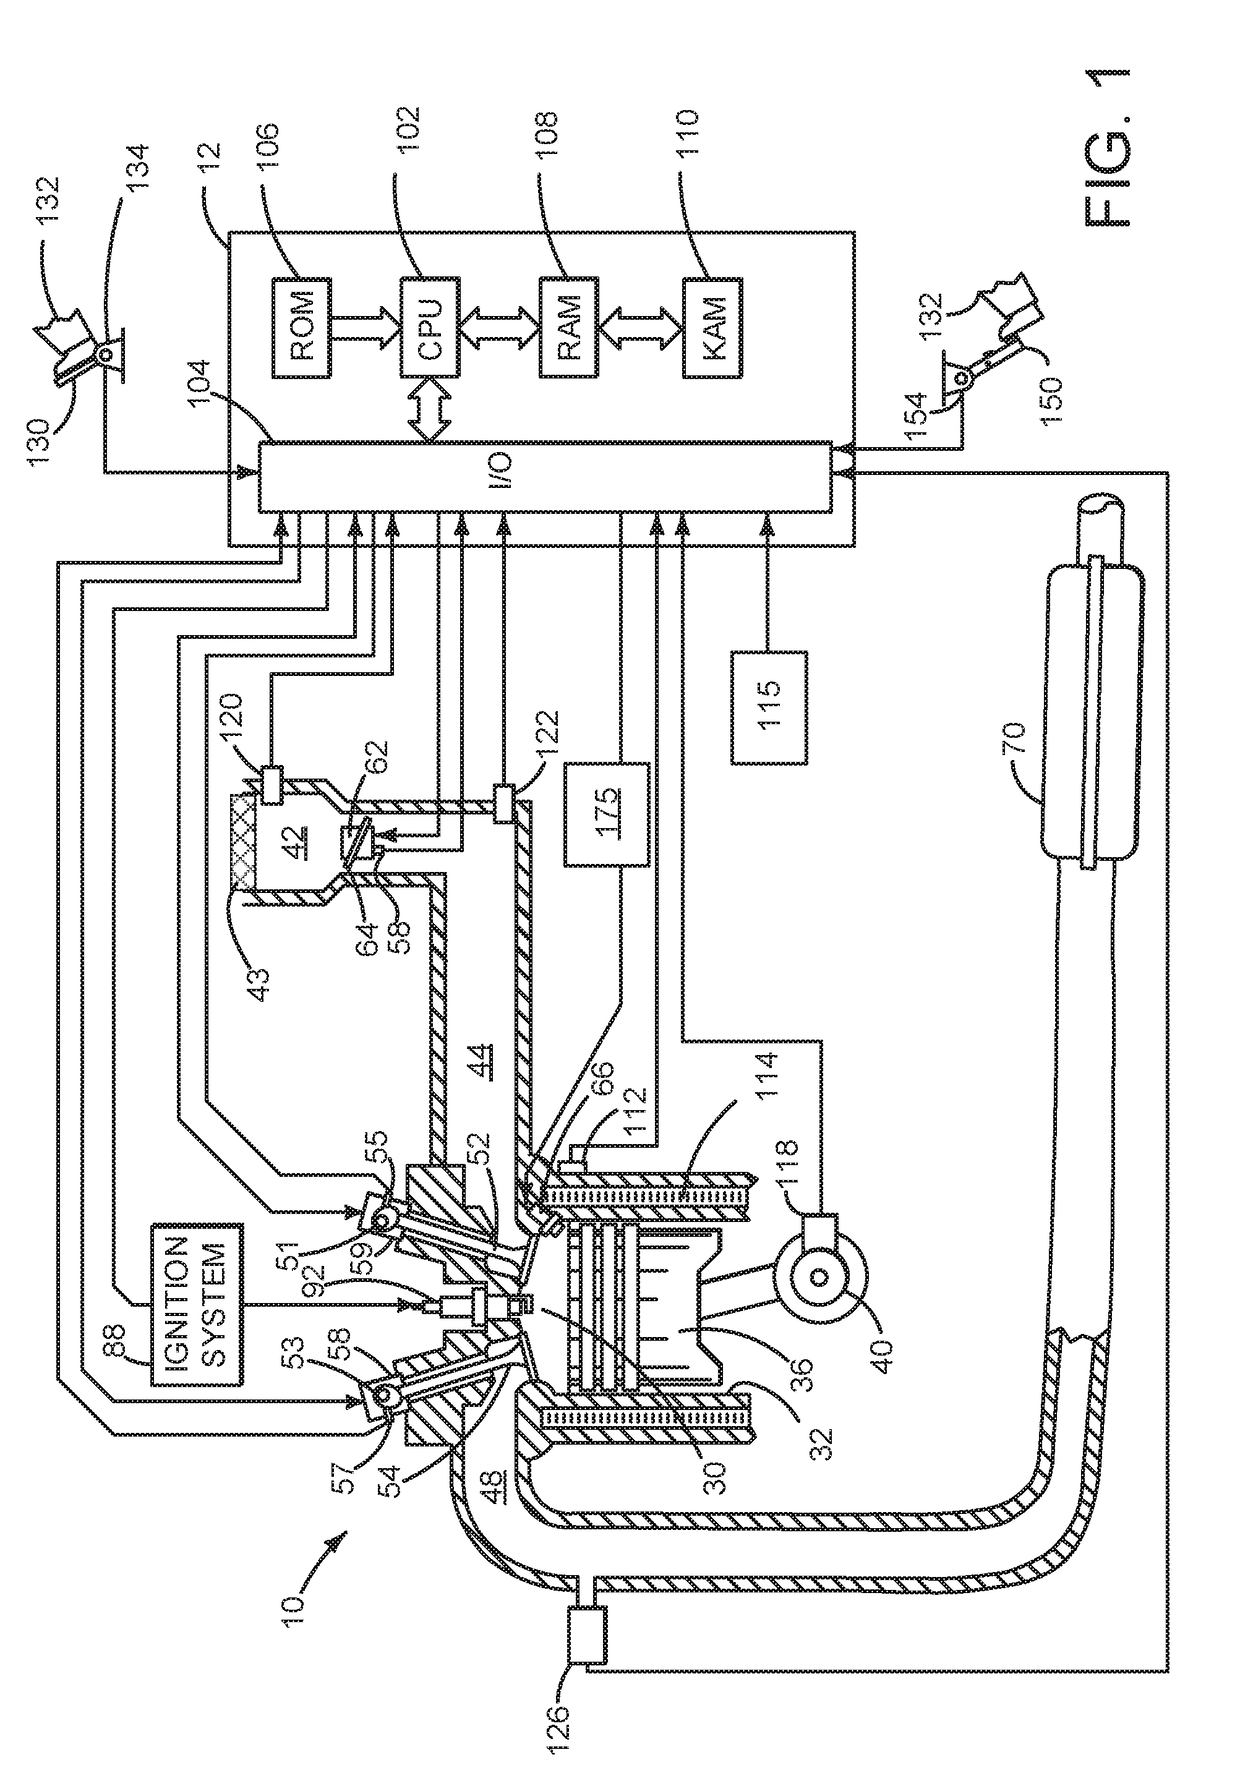 Torque converter control for a variable displacement engine